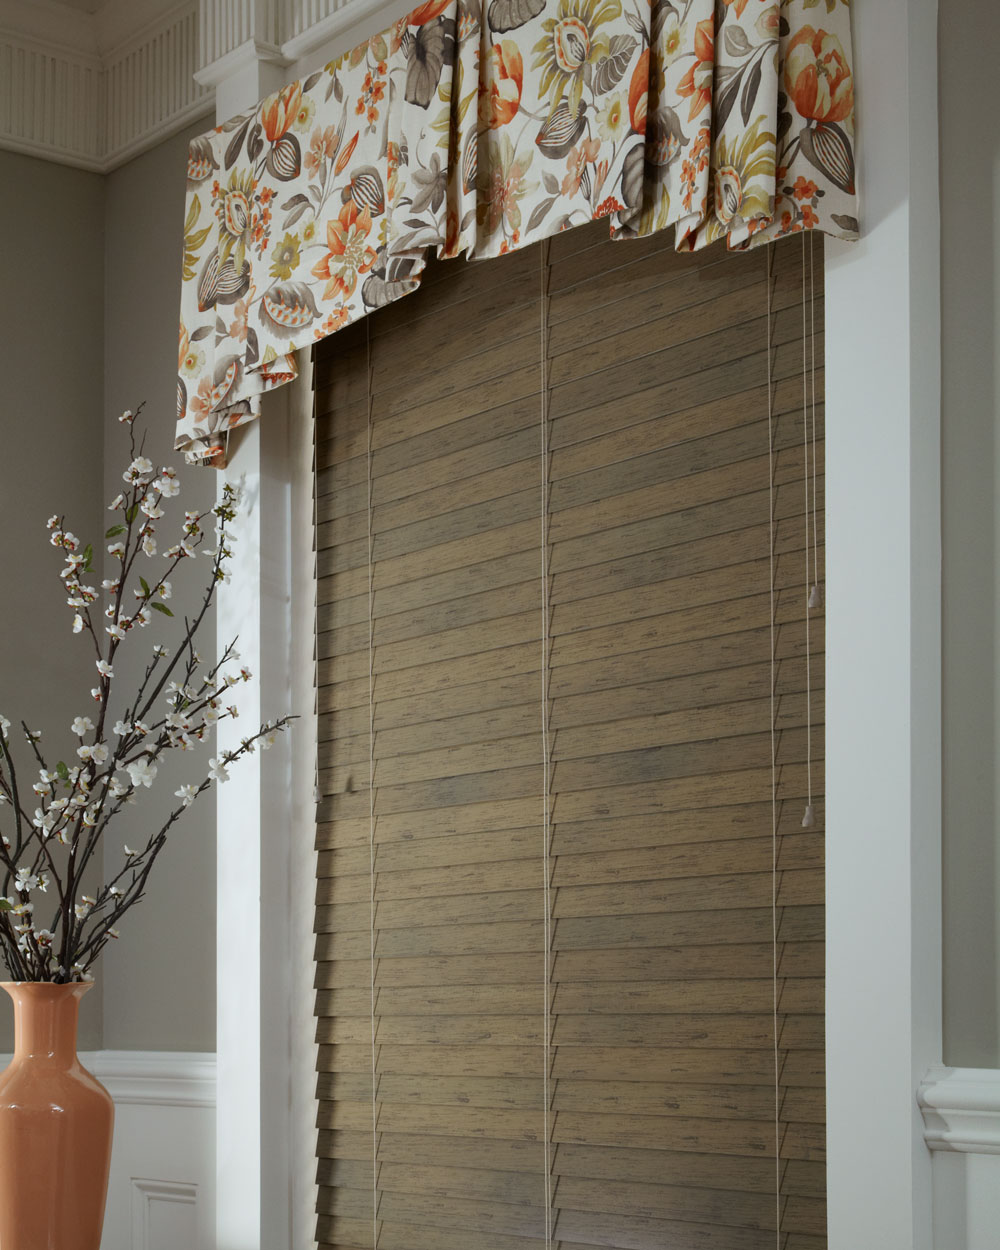 Dark brown Heartland Woods® Wood Blind & Interior Masterpieces Fabric Valance in a white, tan, and orange floral pattern